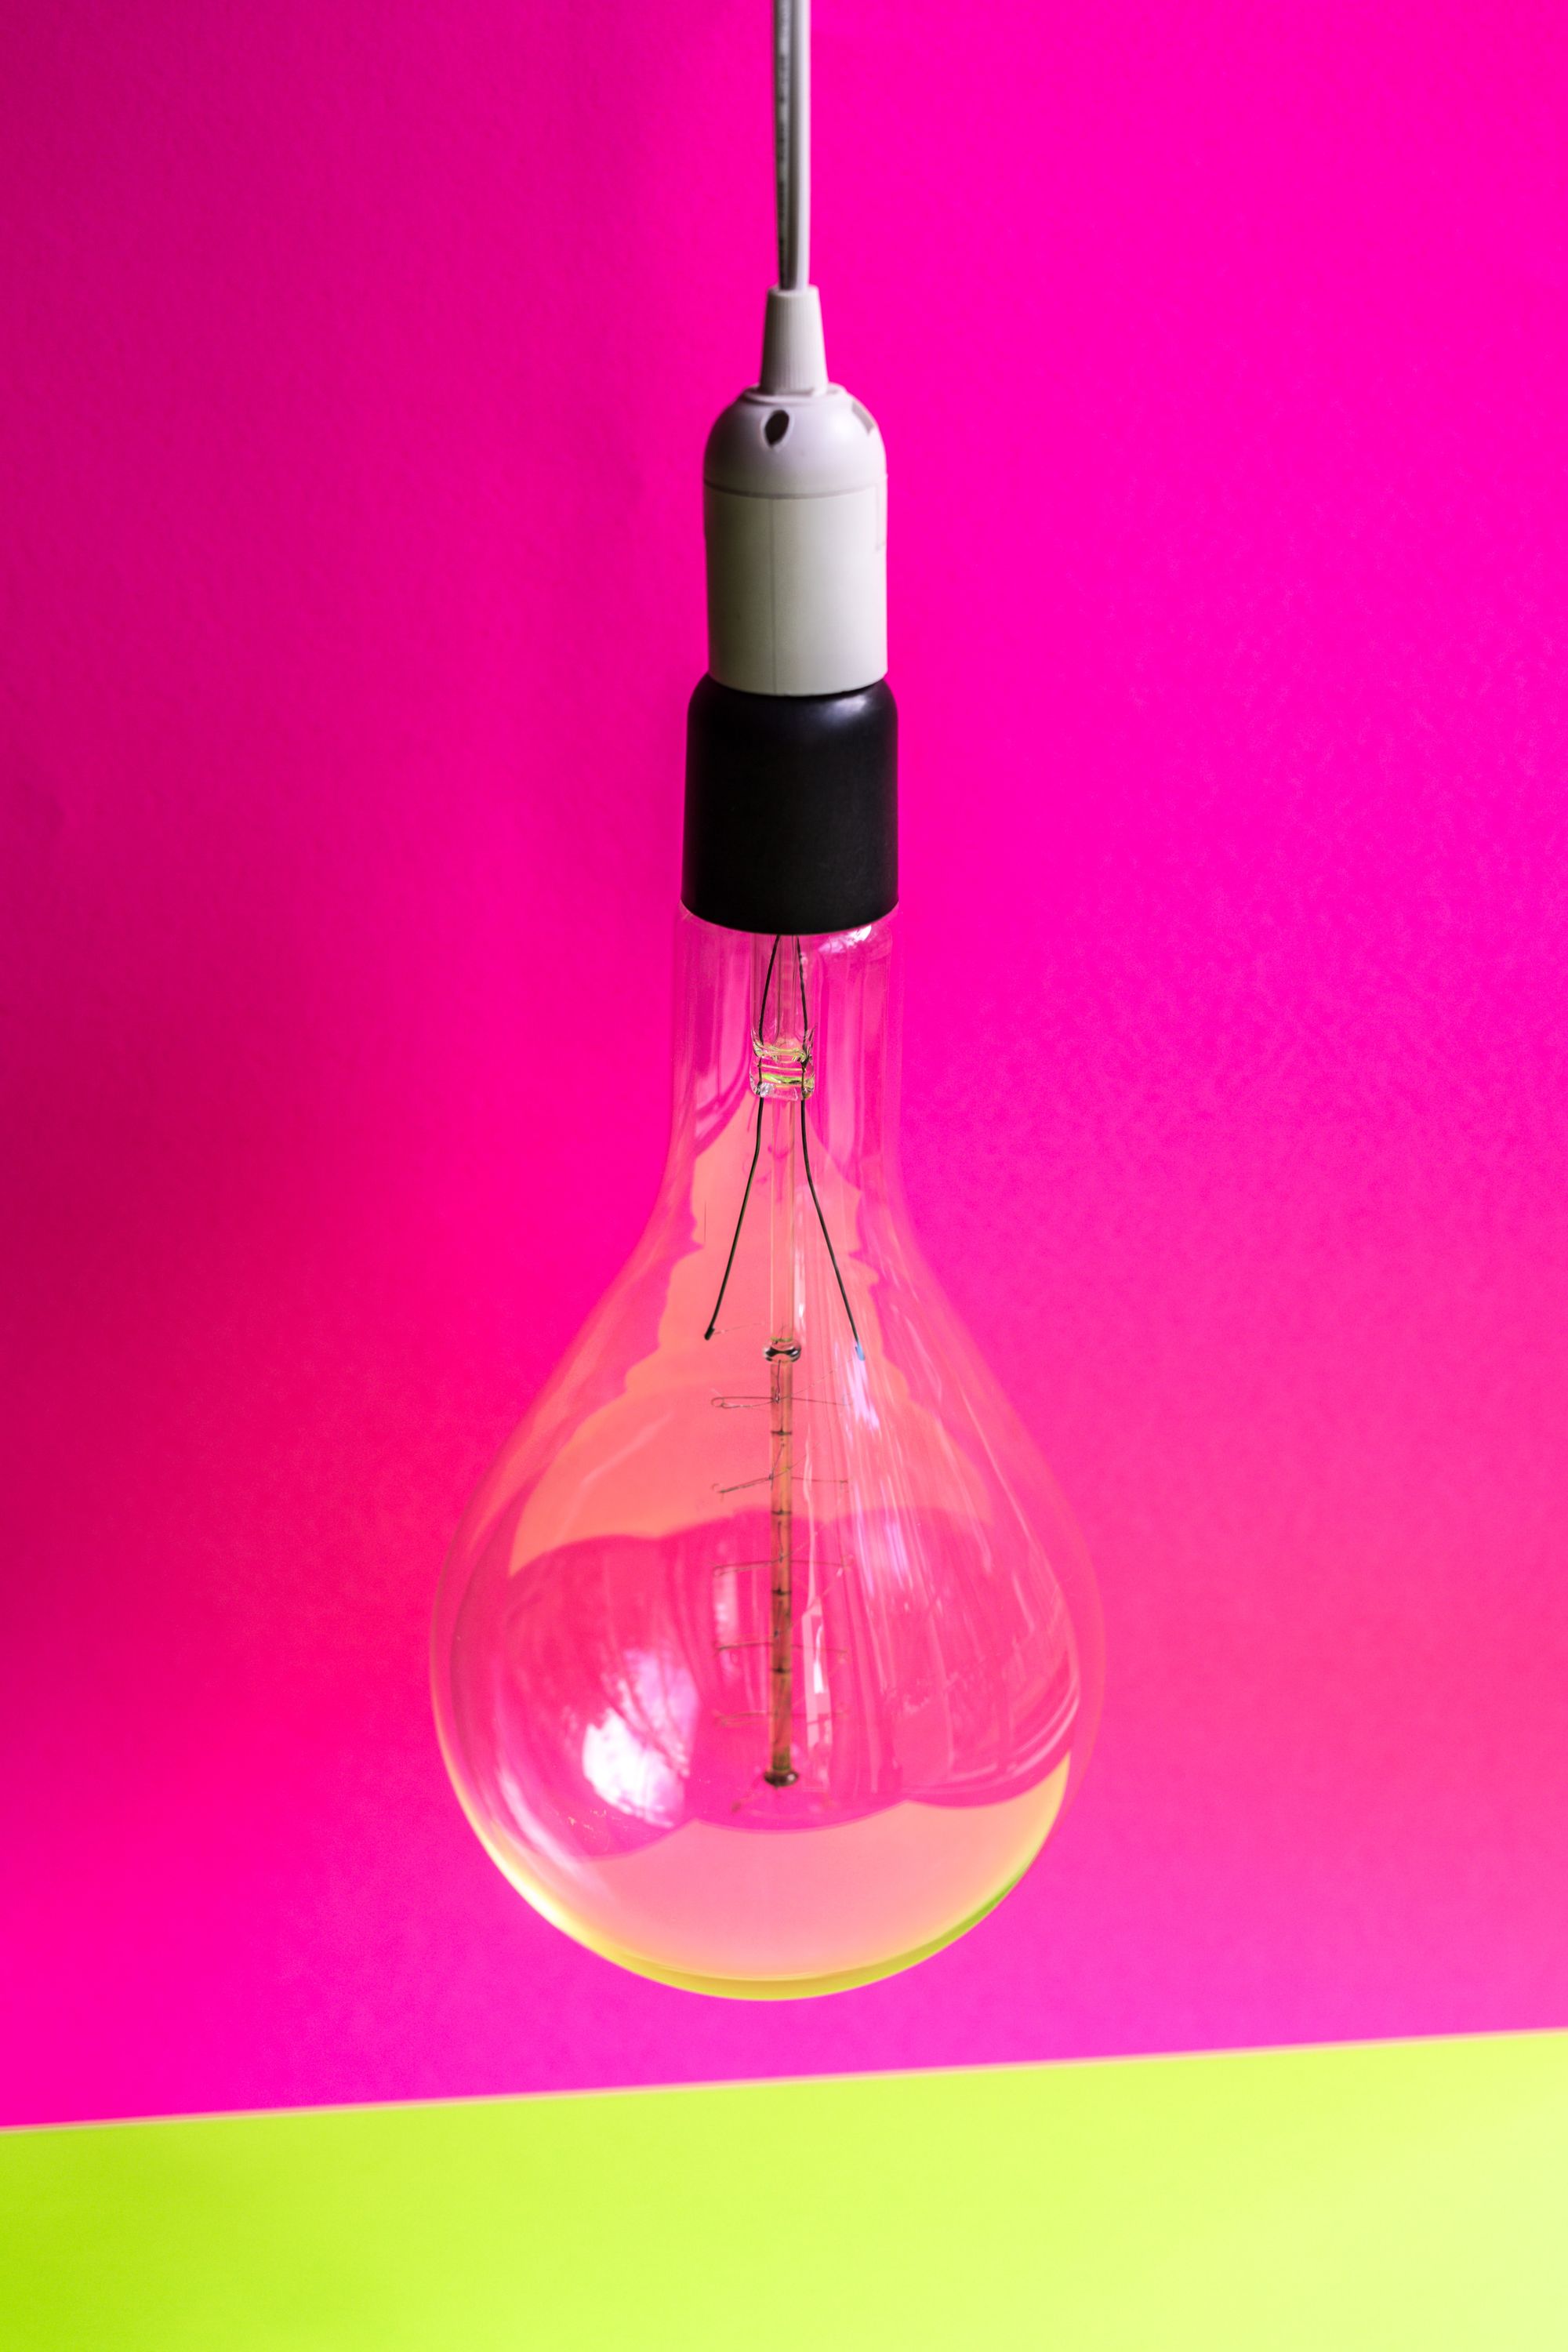 hanging light bulb on a pink and neon yellow background